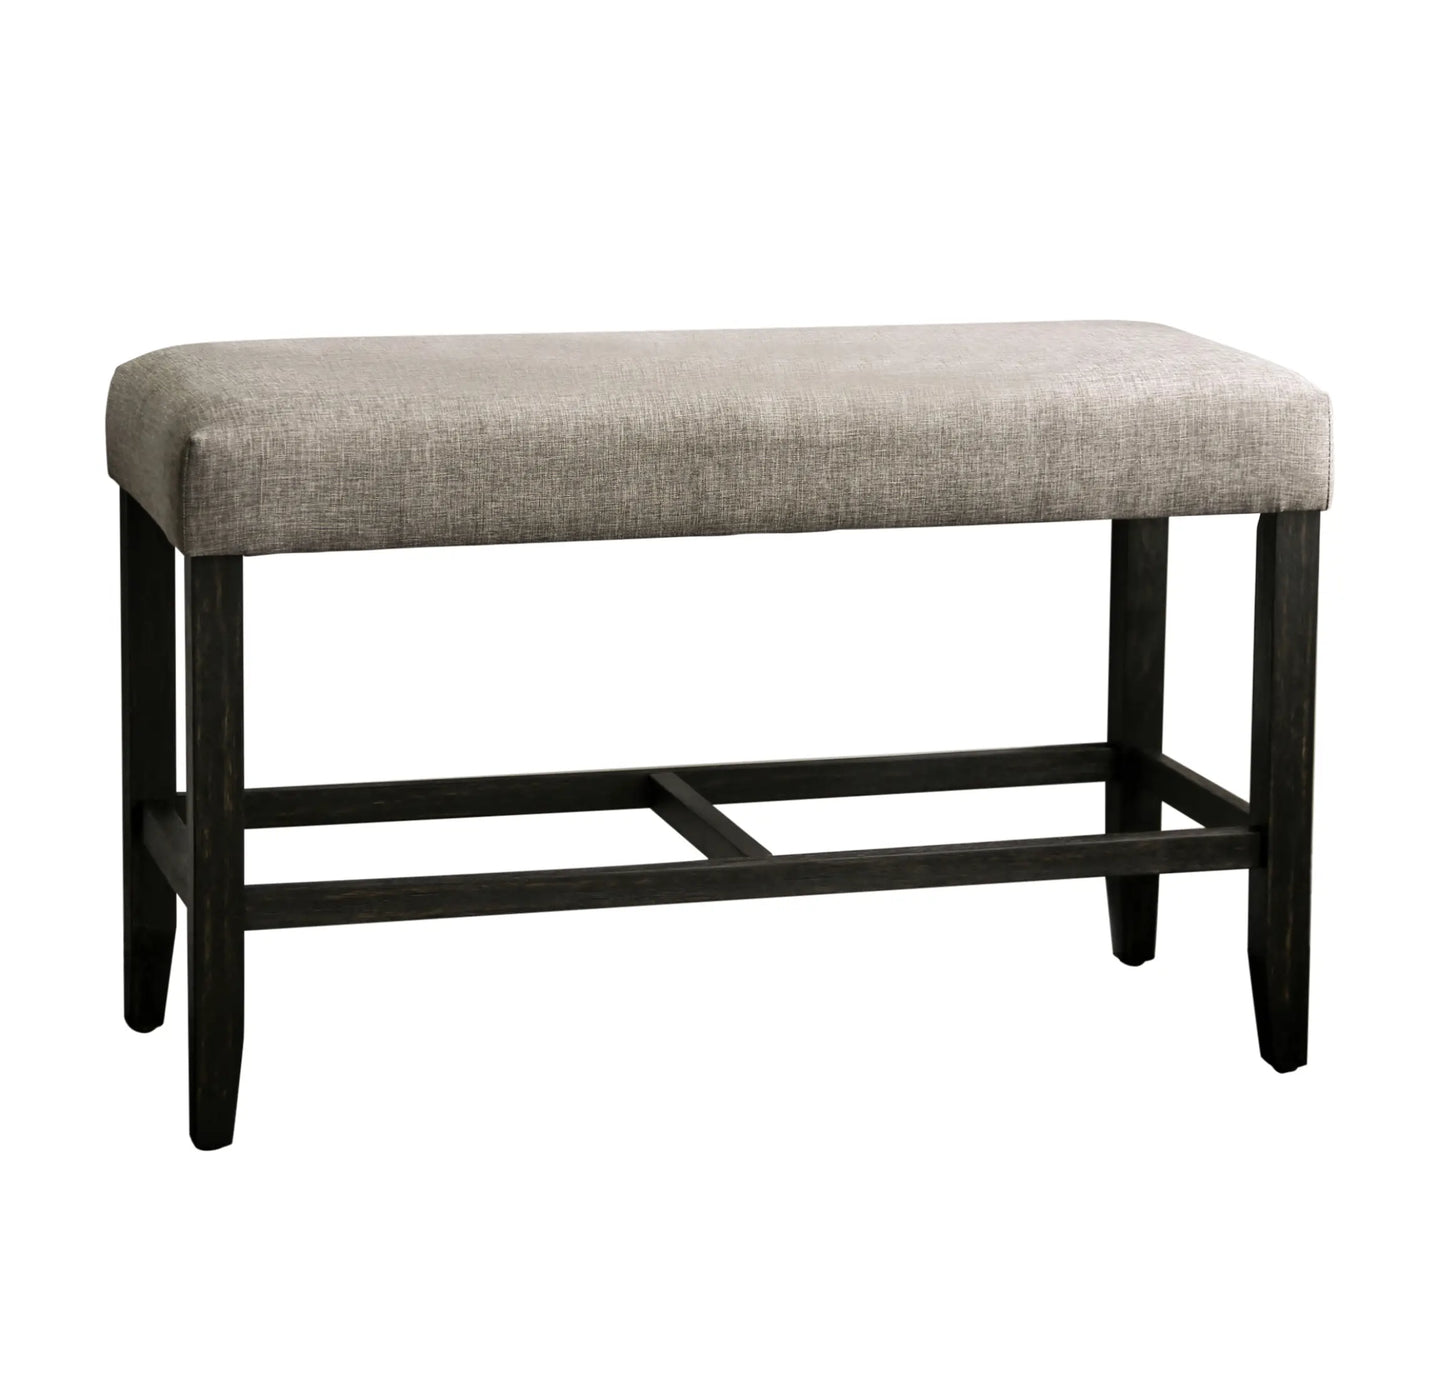 Furniture of America Shielle Rustic Padded Counter Height Bench in Light Gray - IDF-3736LG-PBN